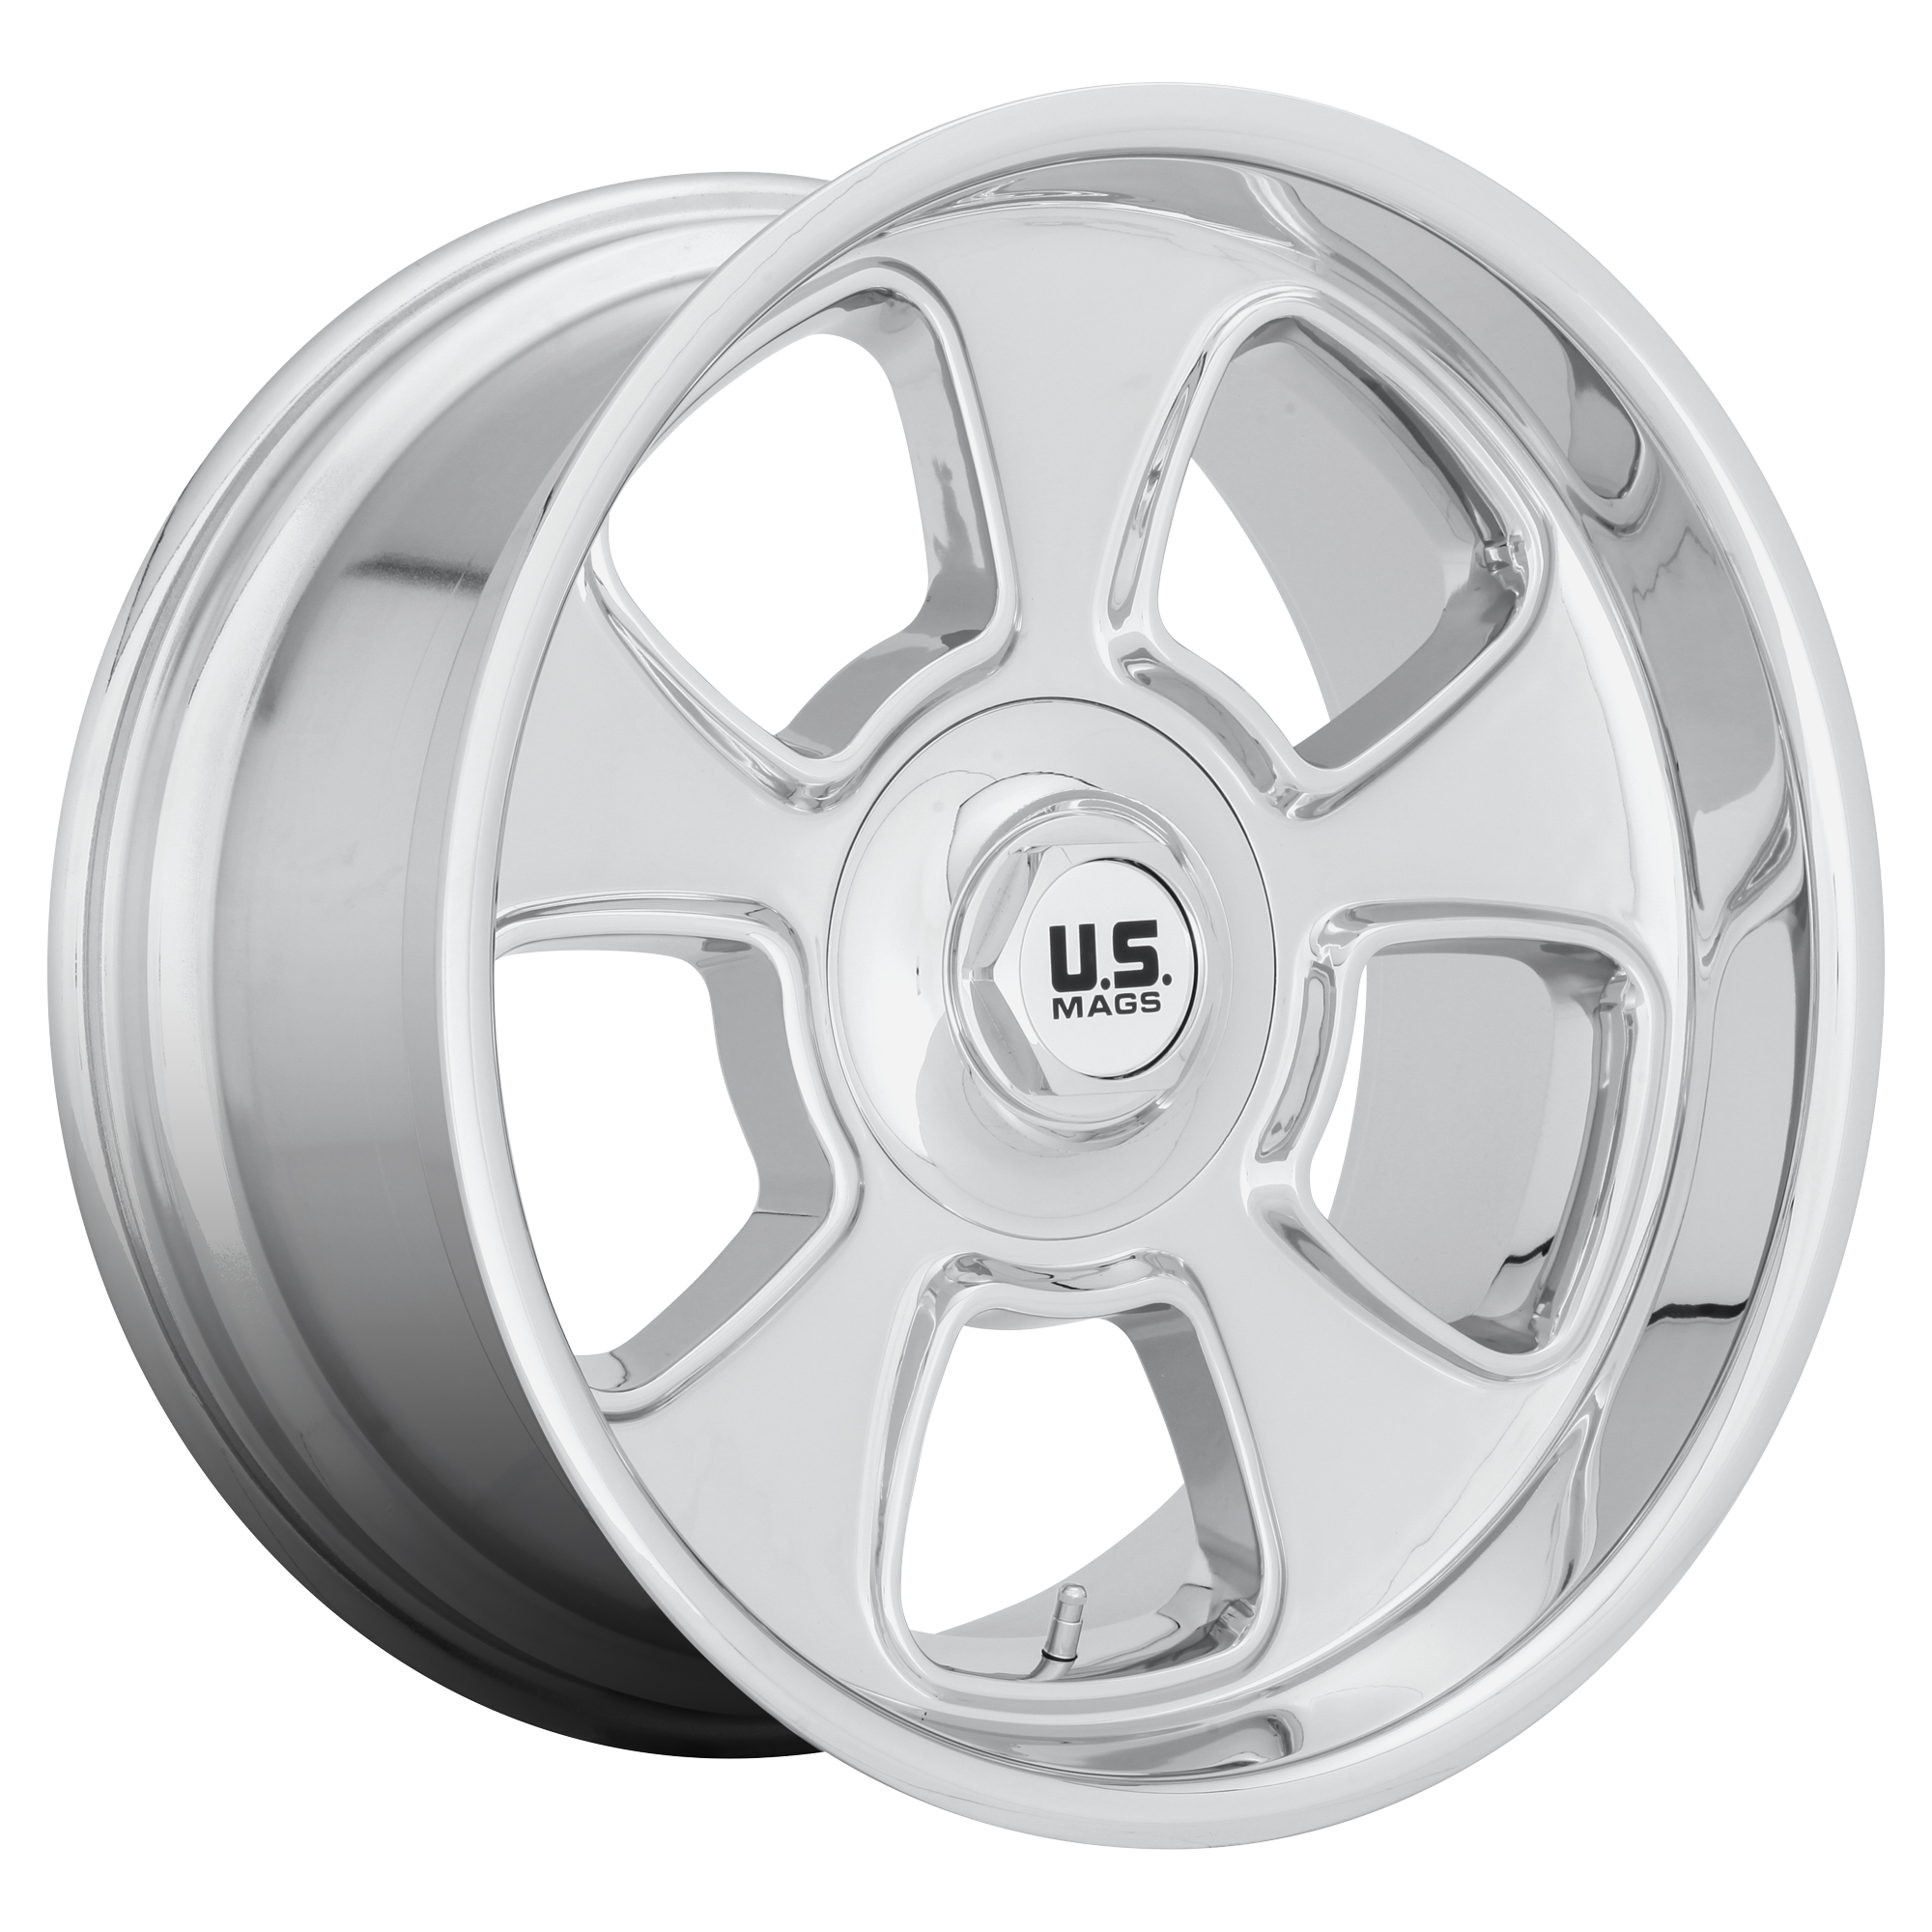 BOULEVARD 20x9.5 6x139.70 CHROME PLATED (1 mm) - Tires and Engine Performance